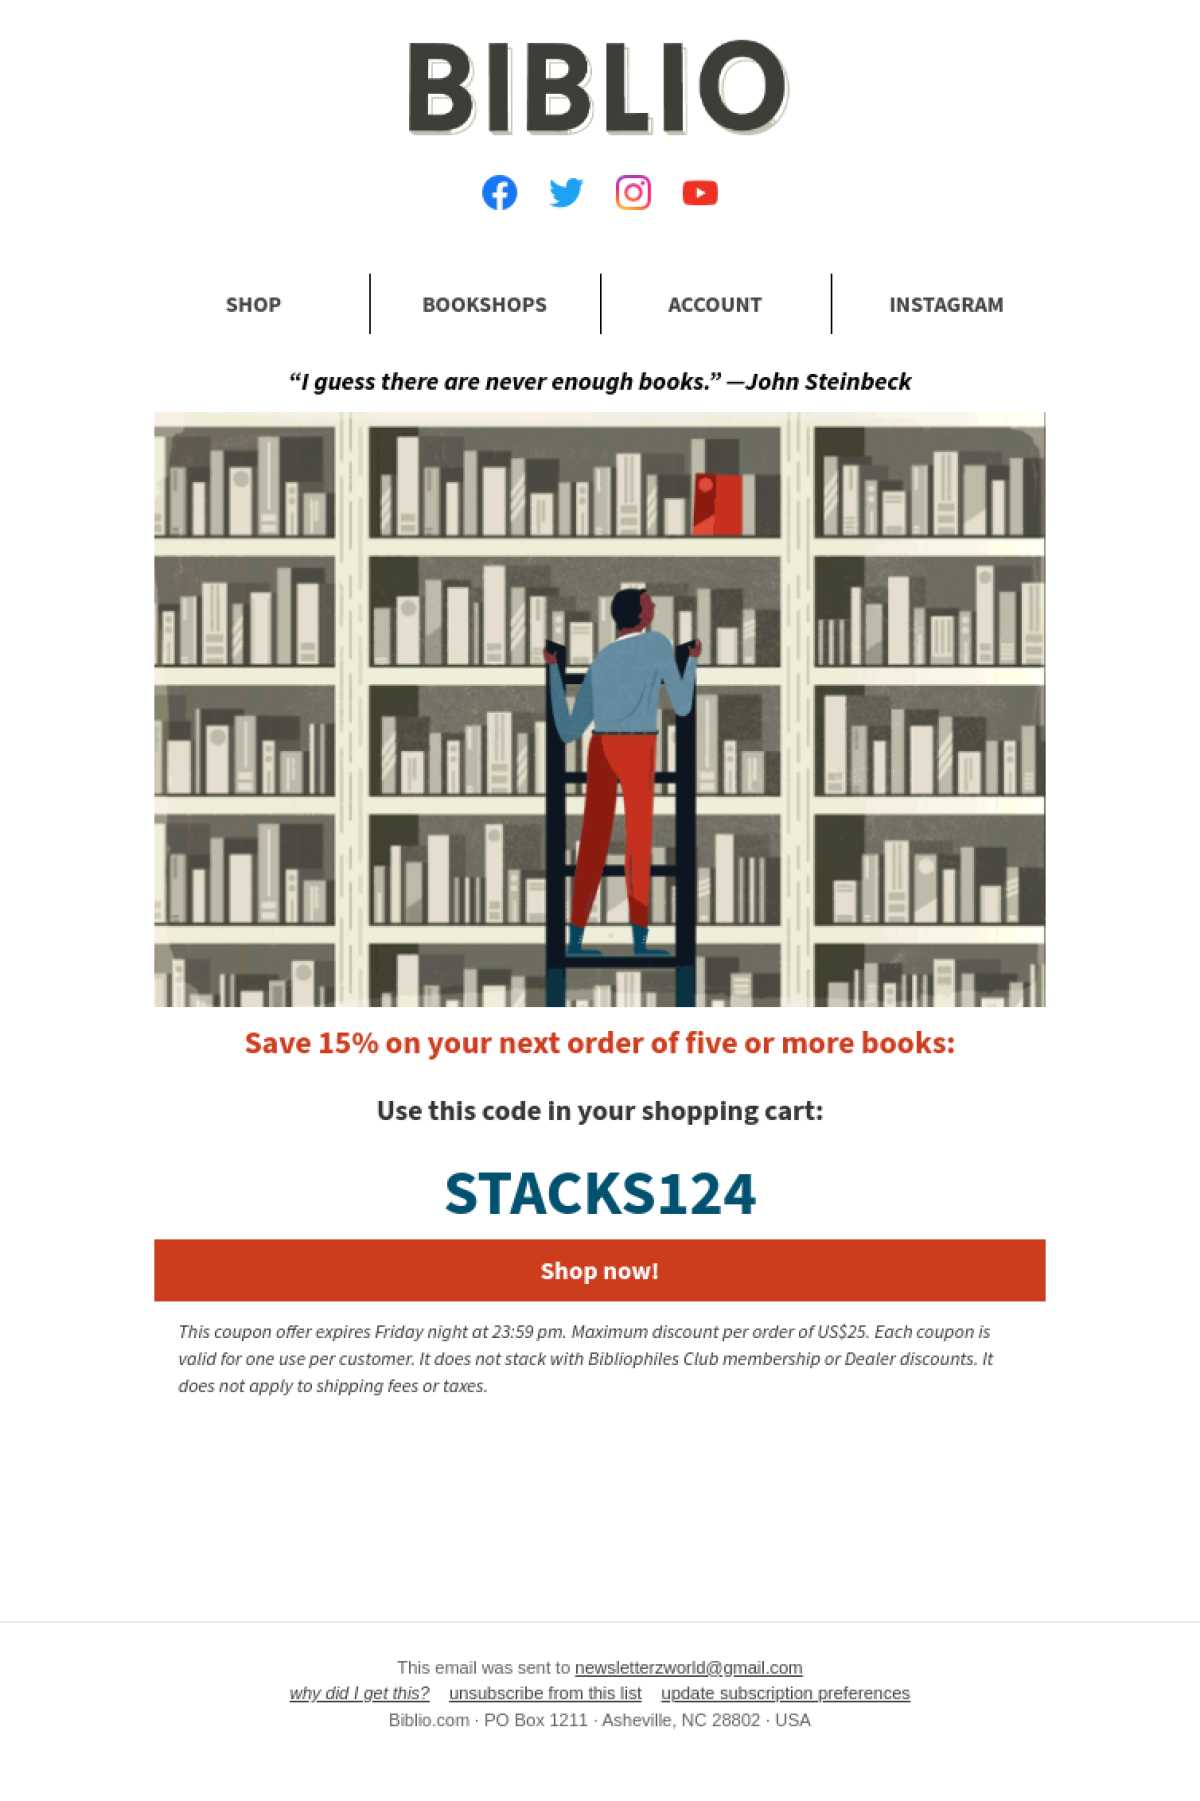 You deserve a stack of books!